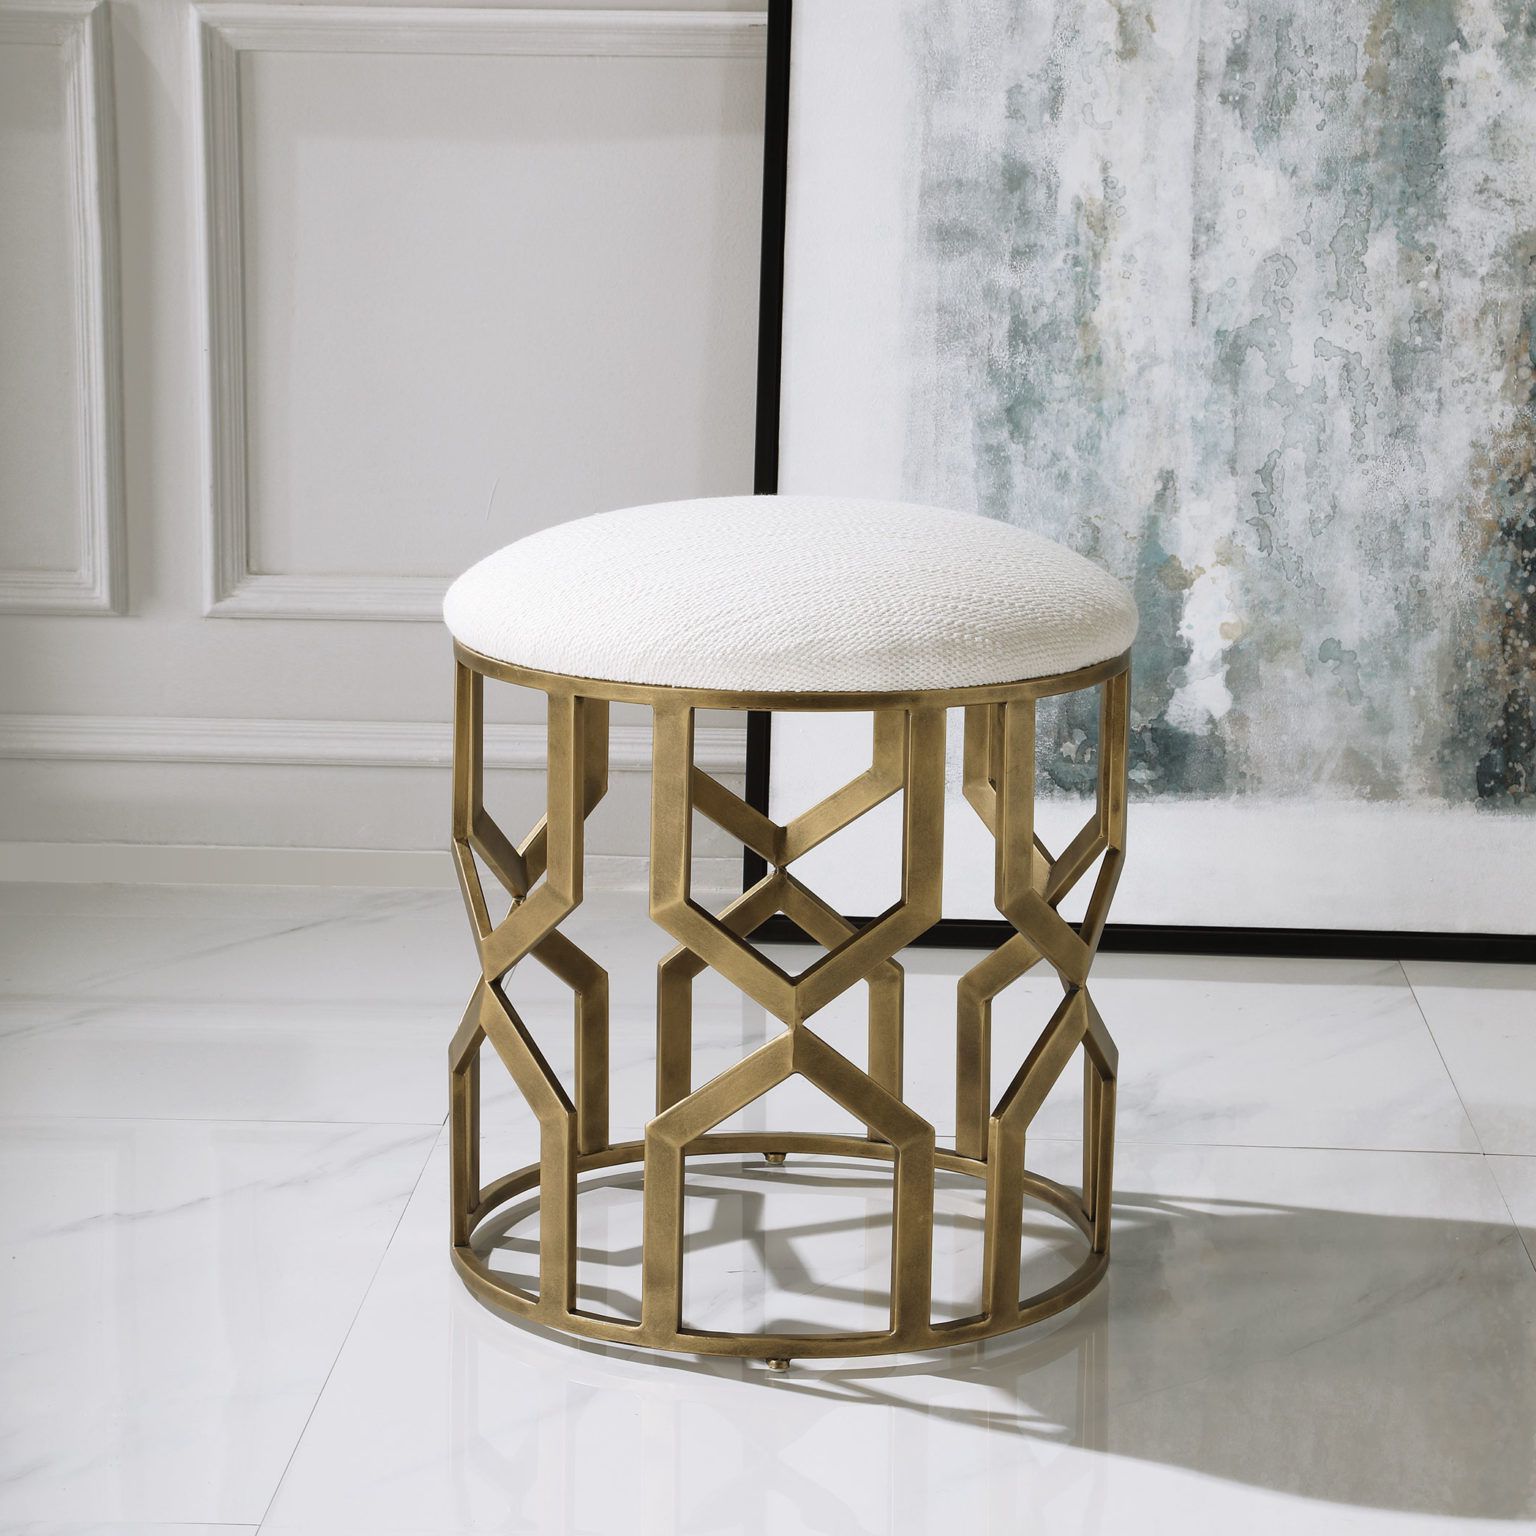 Gray And Beige Trellis Cylinder Pouf Ottomans In Well Known Ottomans & Poufs (View 1 of 10)